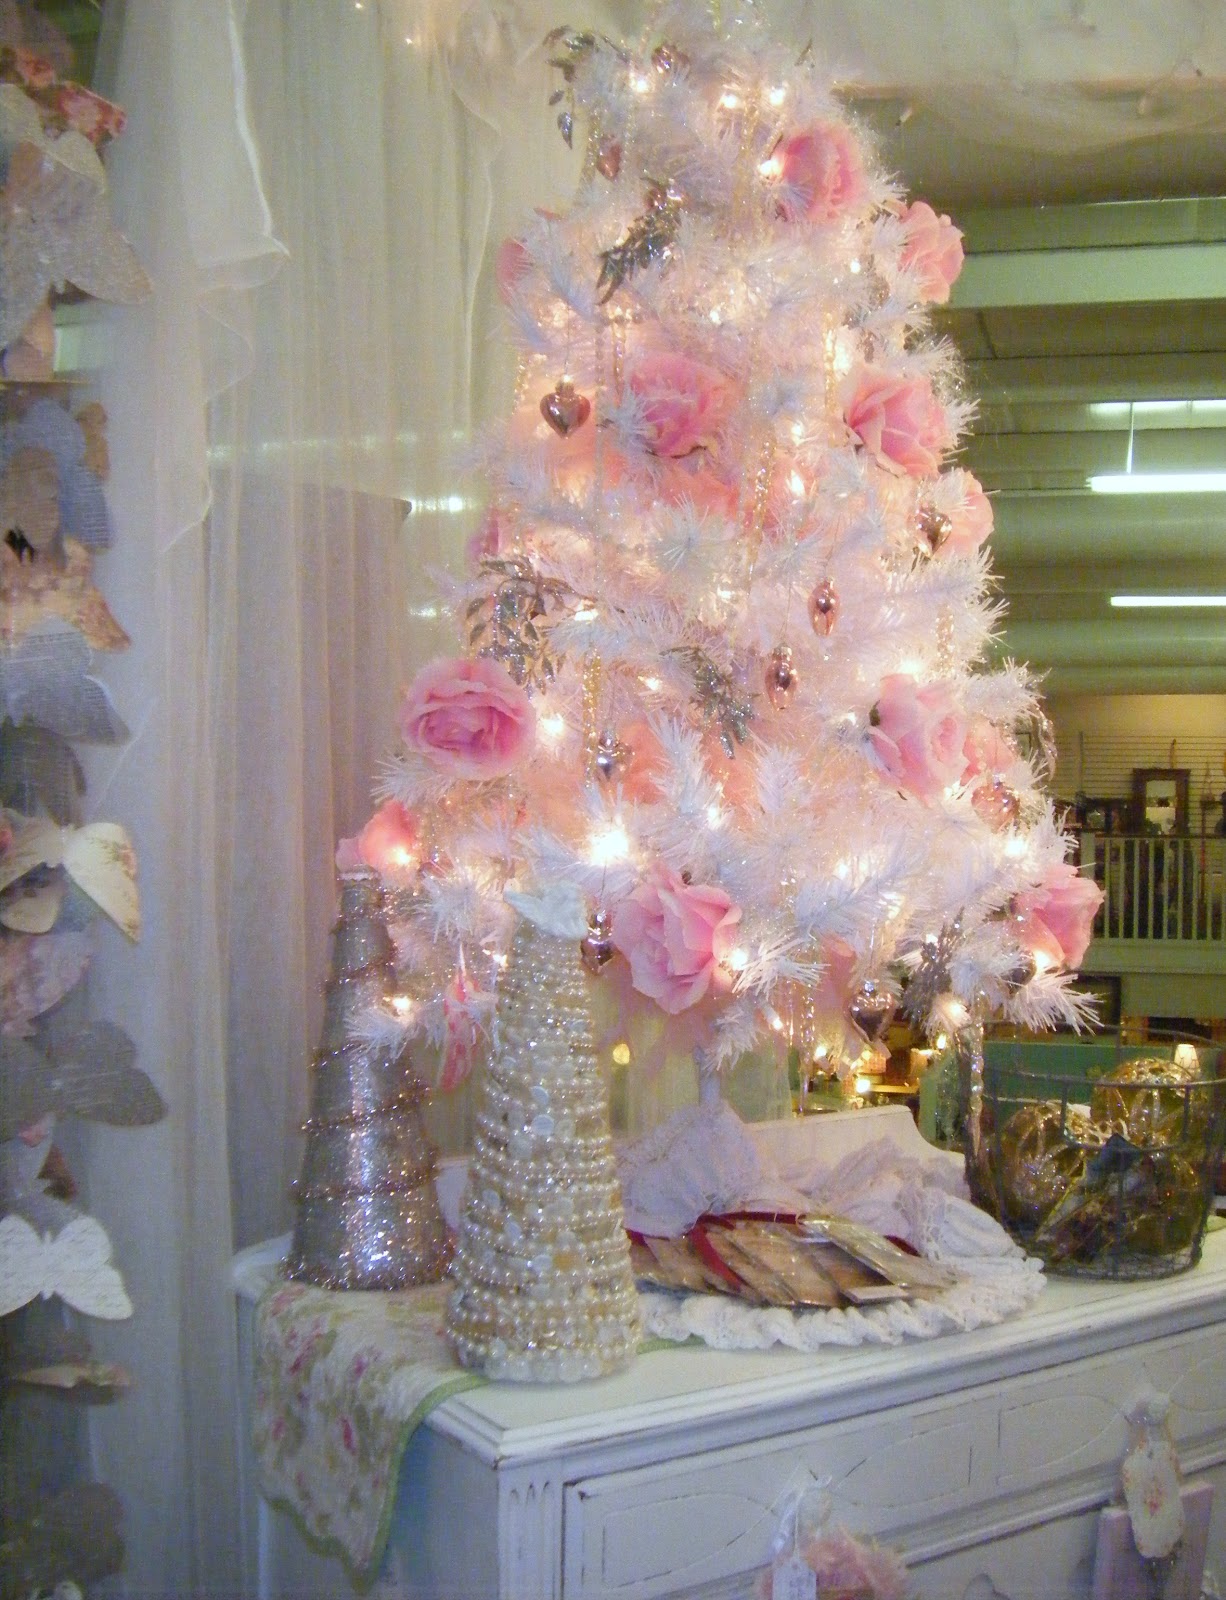 Ruffles n Raspberries: Booth Decorated for the Holidays!